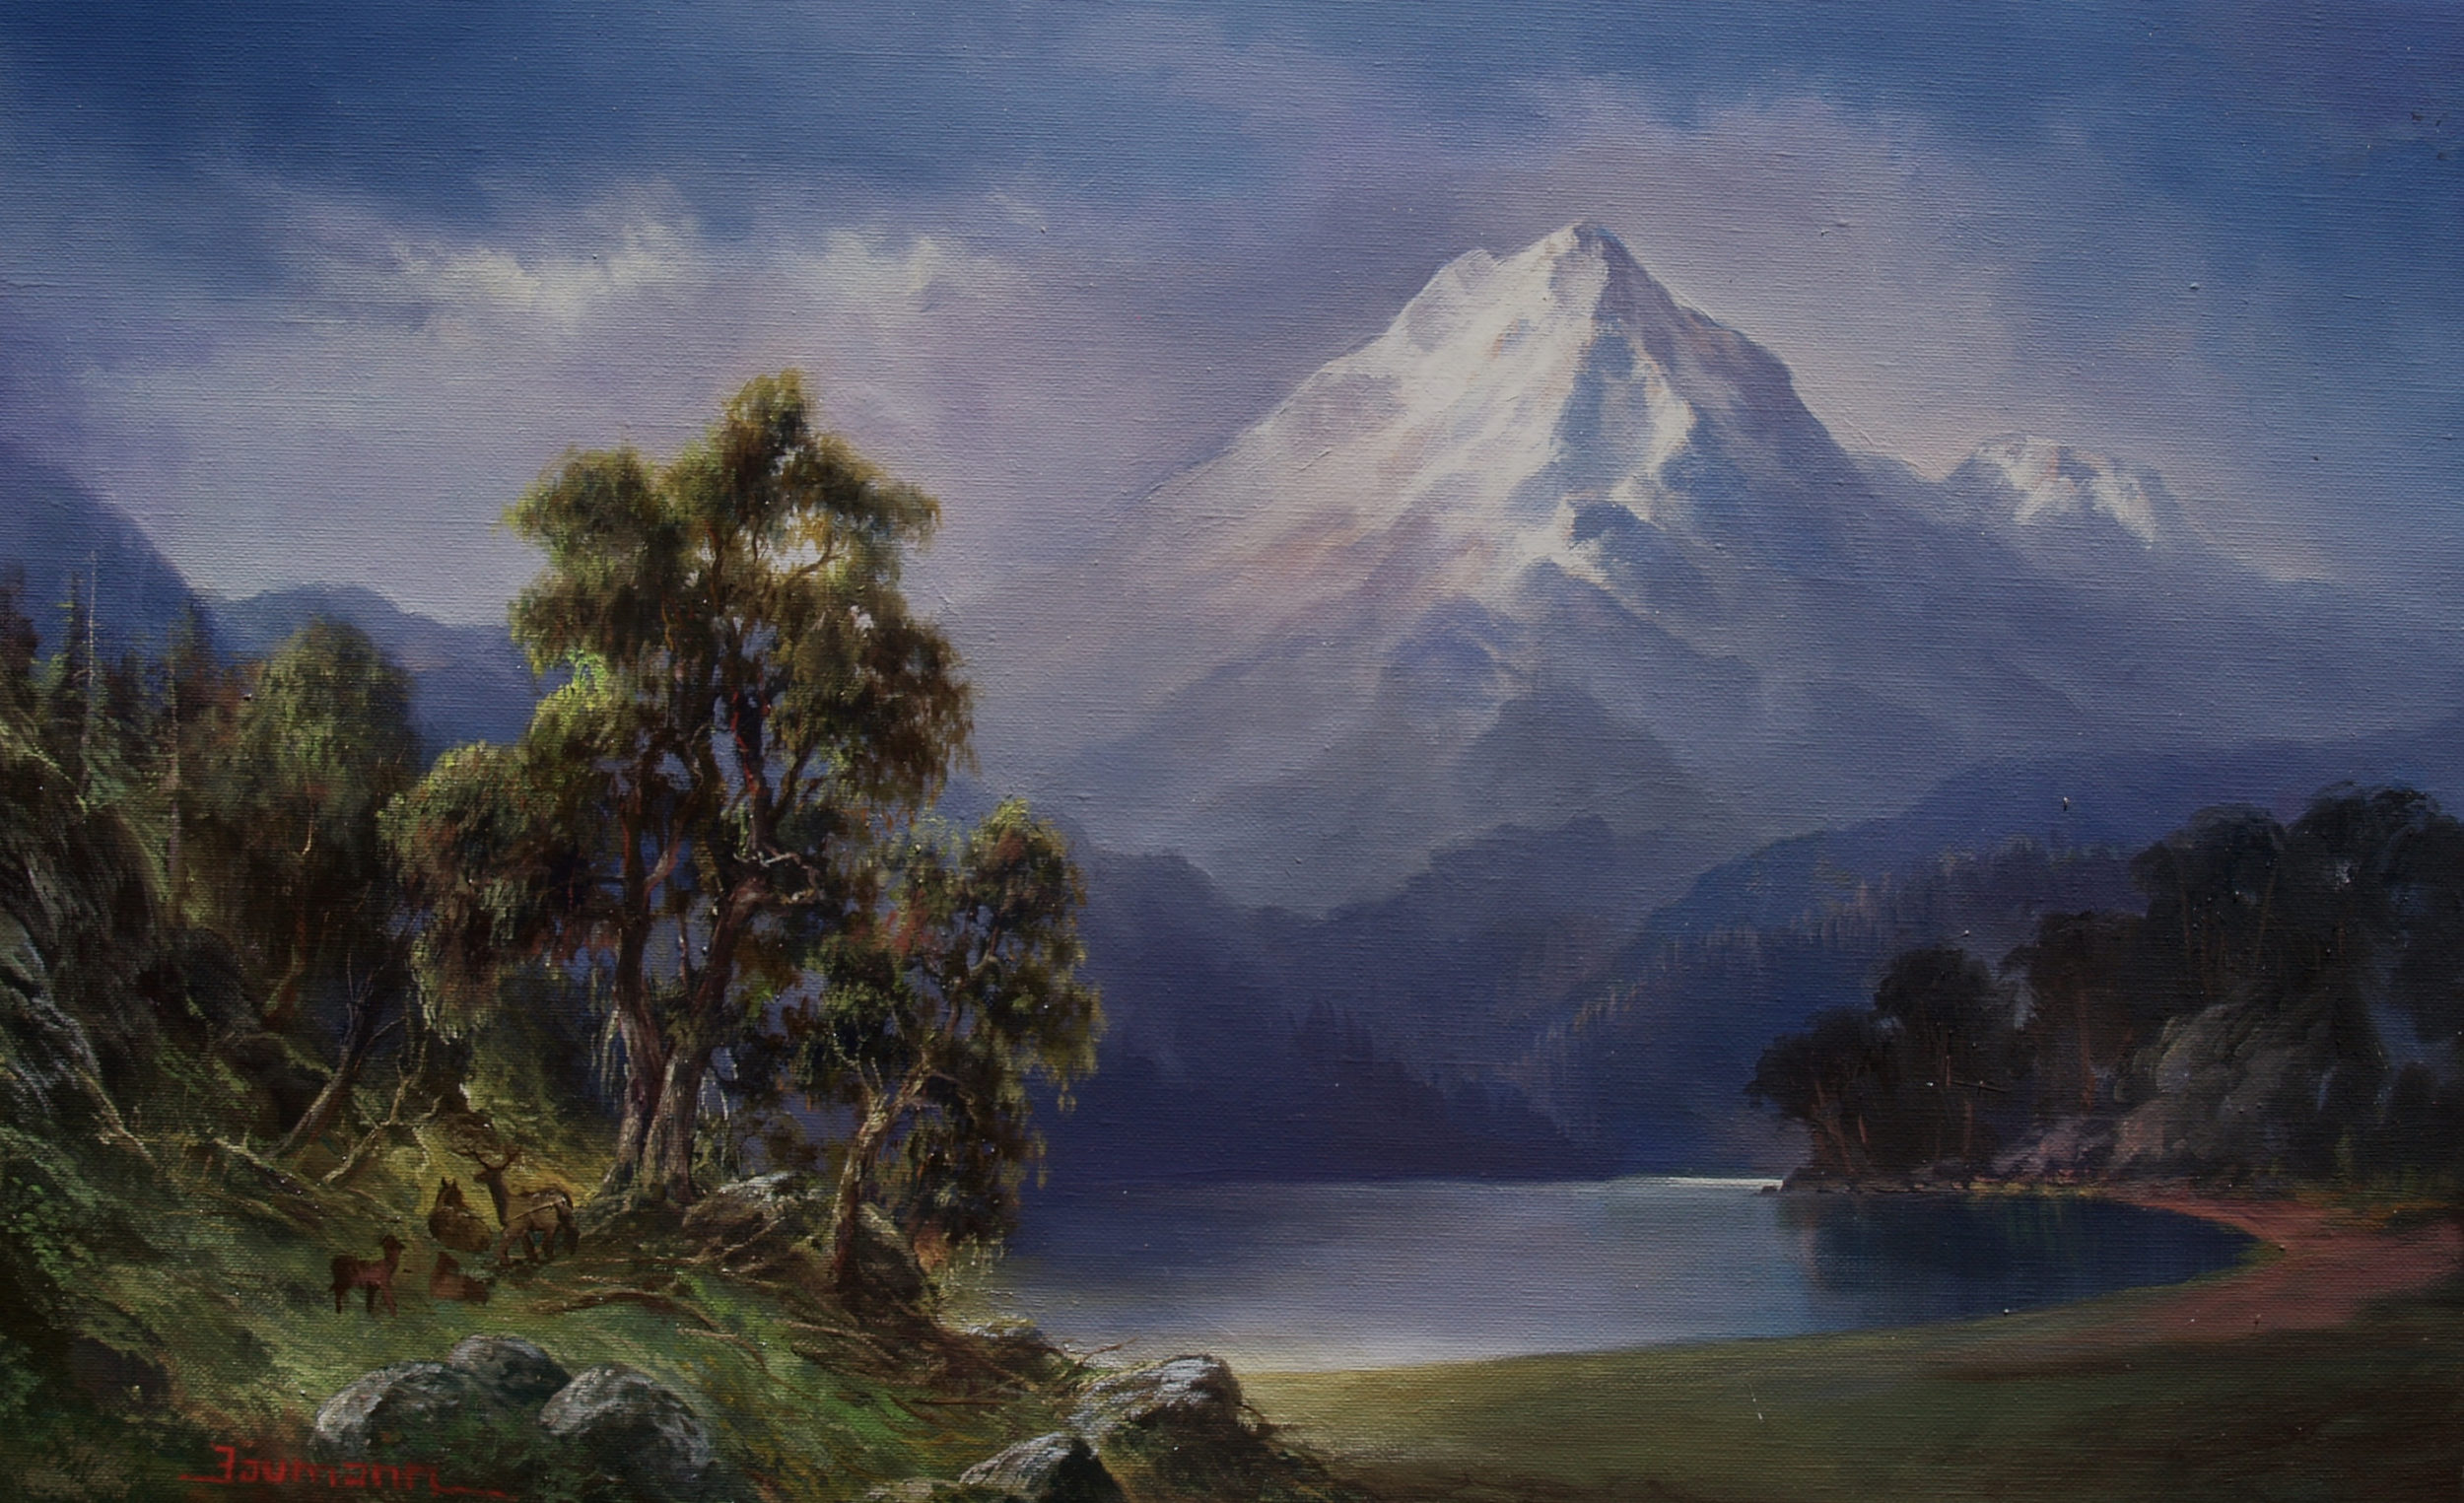 This is a view of Mt. Shasta painted in oil paints on location from Tule Lake by artist Stefan Baumann.